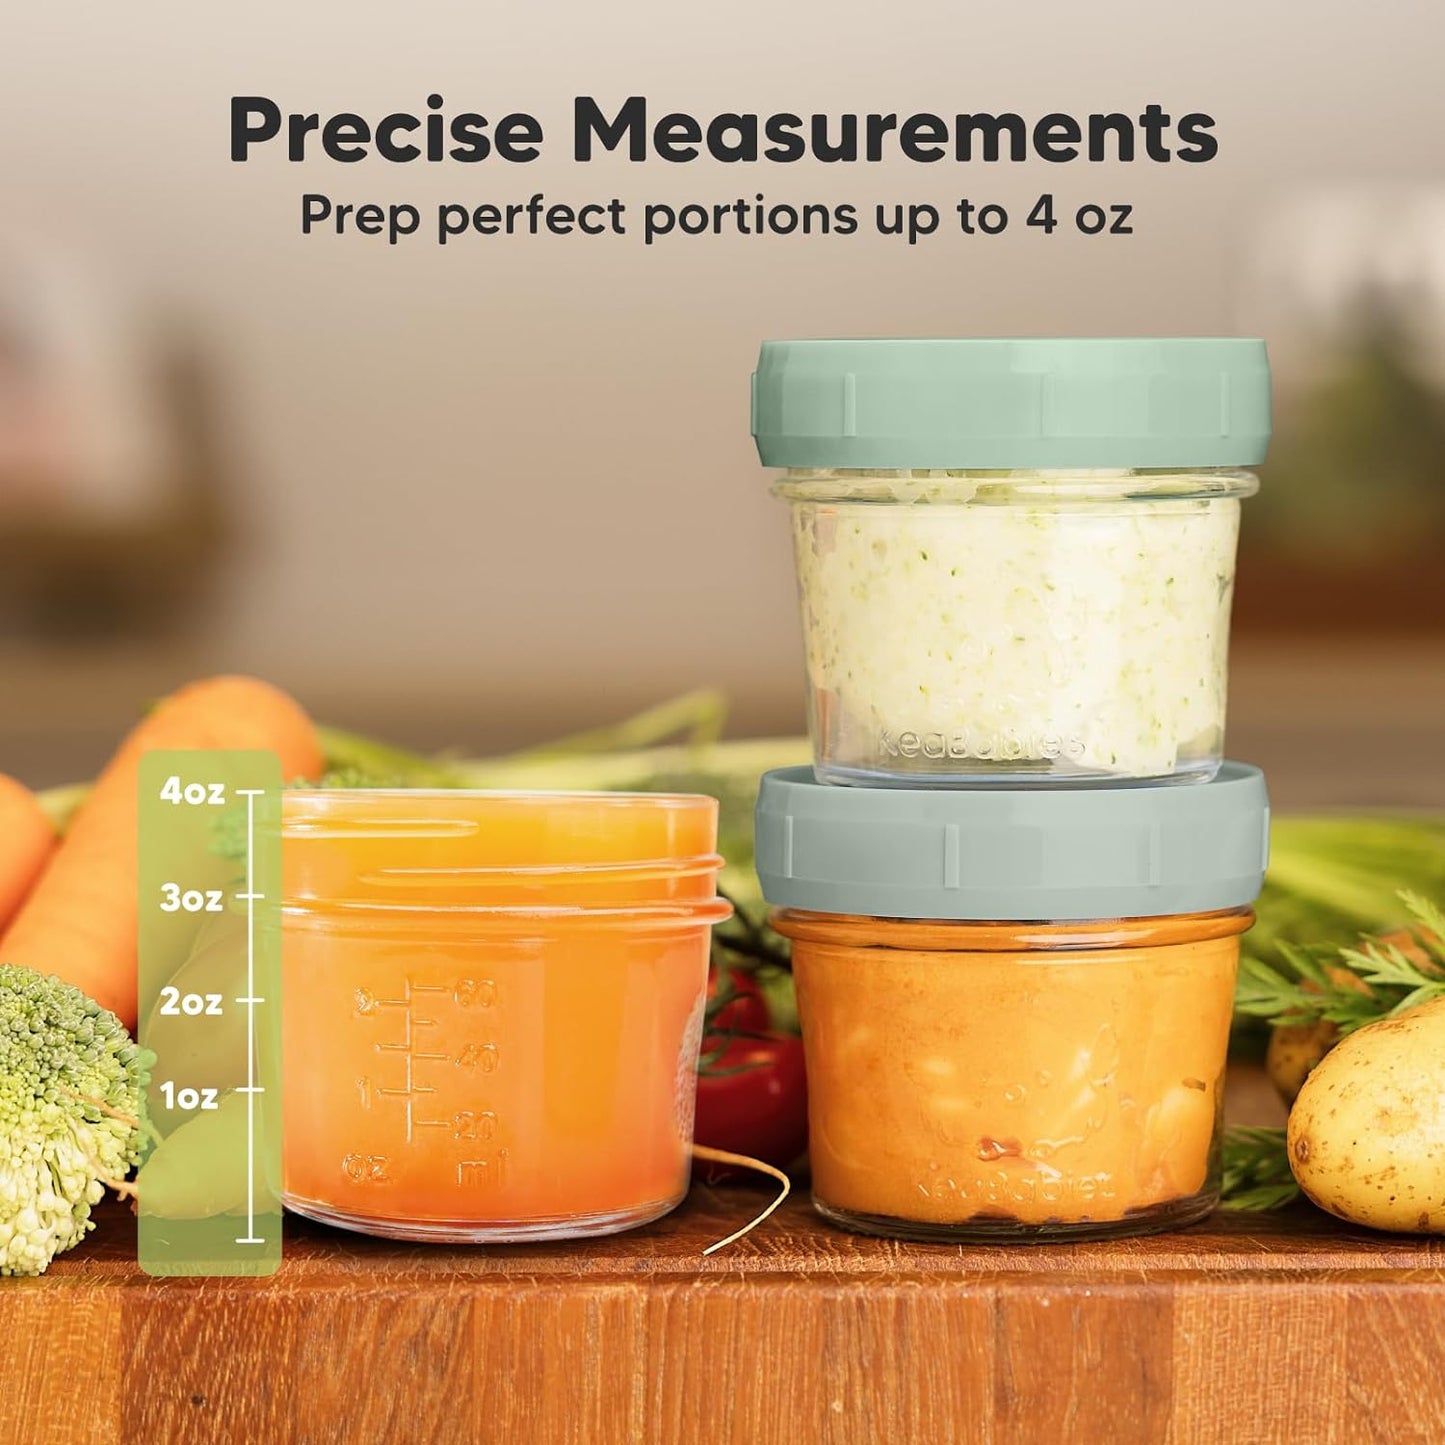 KeaBabies 12-Pack Glass Baby Food Containers- 4 oz Leak-Proof, Microwavable Baby Food Storage Containers, Baby Food Freezer Tray,Puree Glass Baby Food Jars,Baby Bullet Jars with Lids (Musk Dusk)